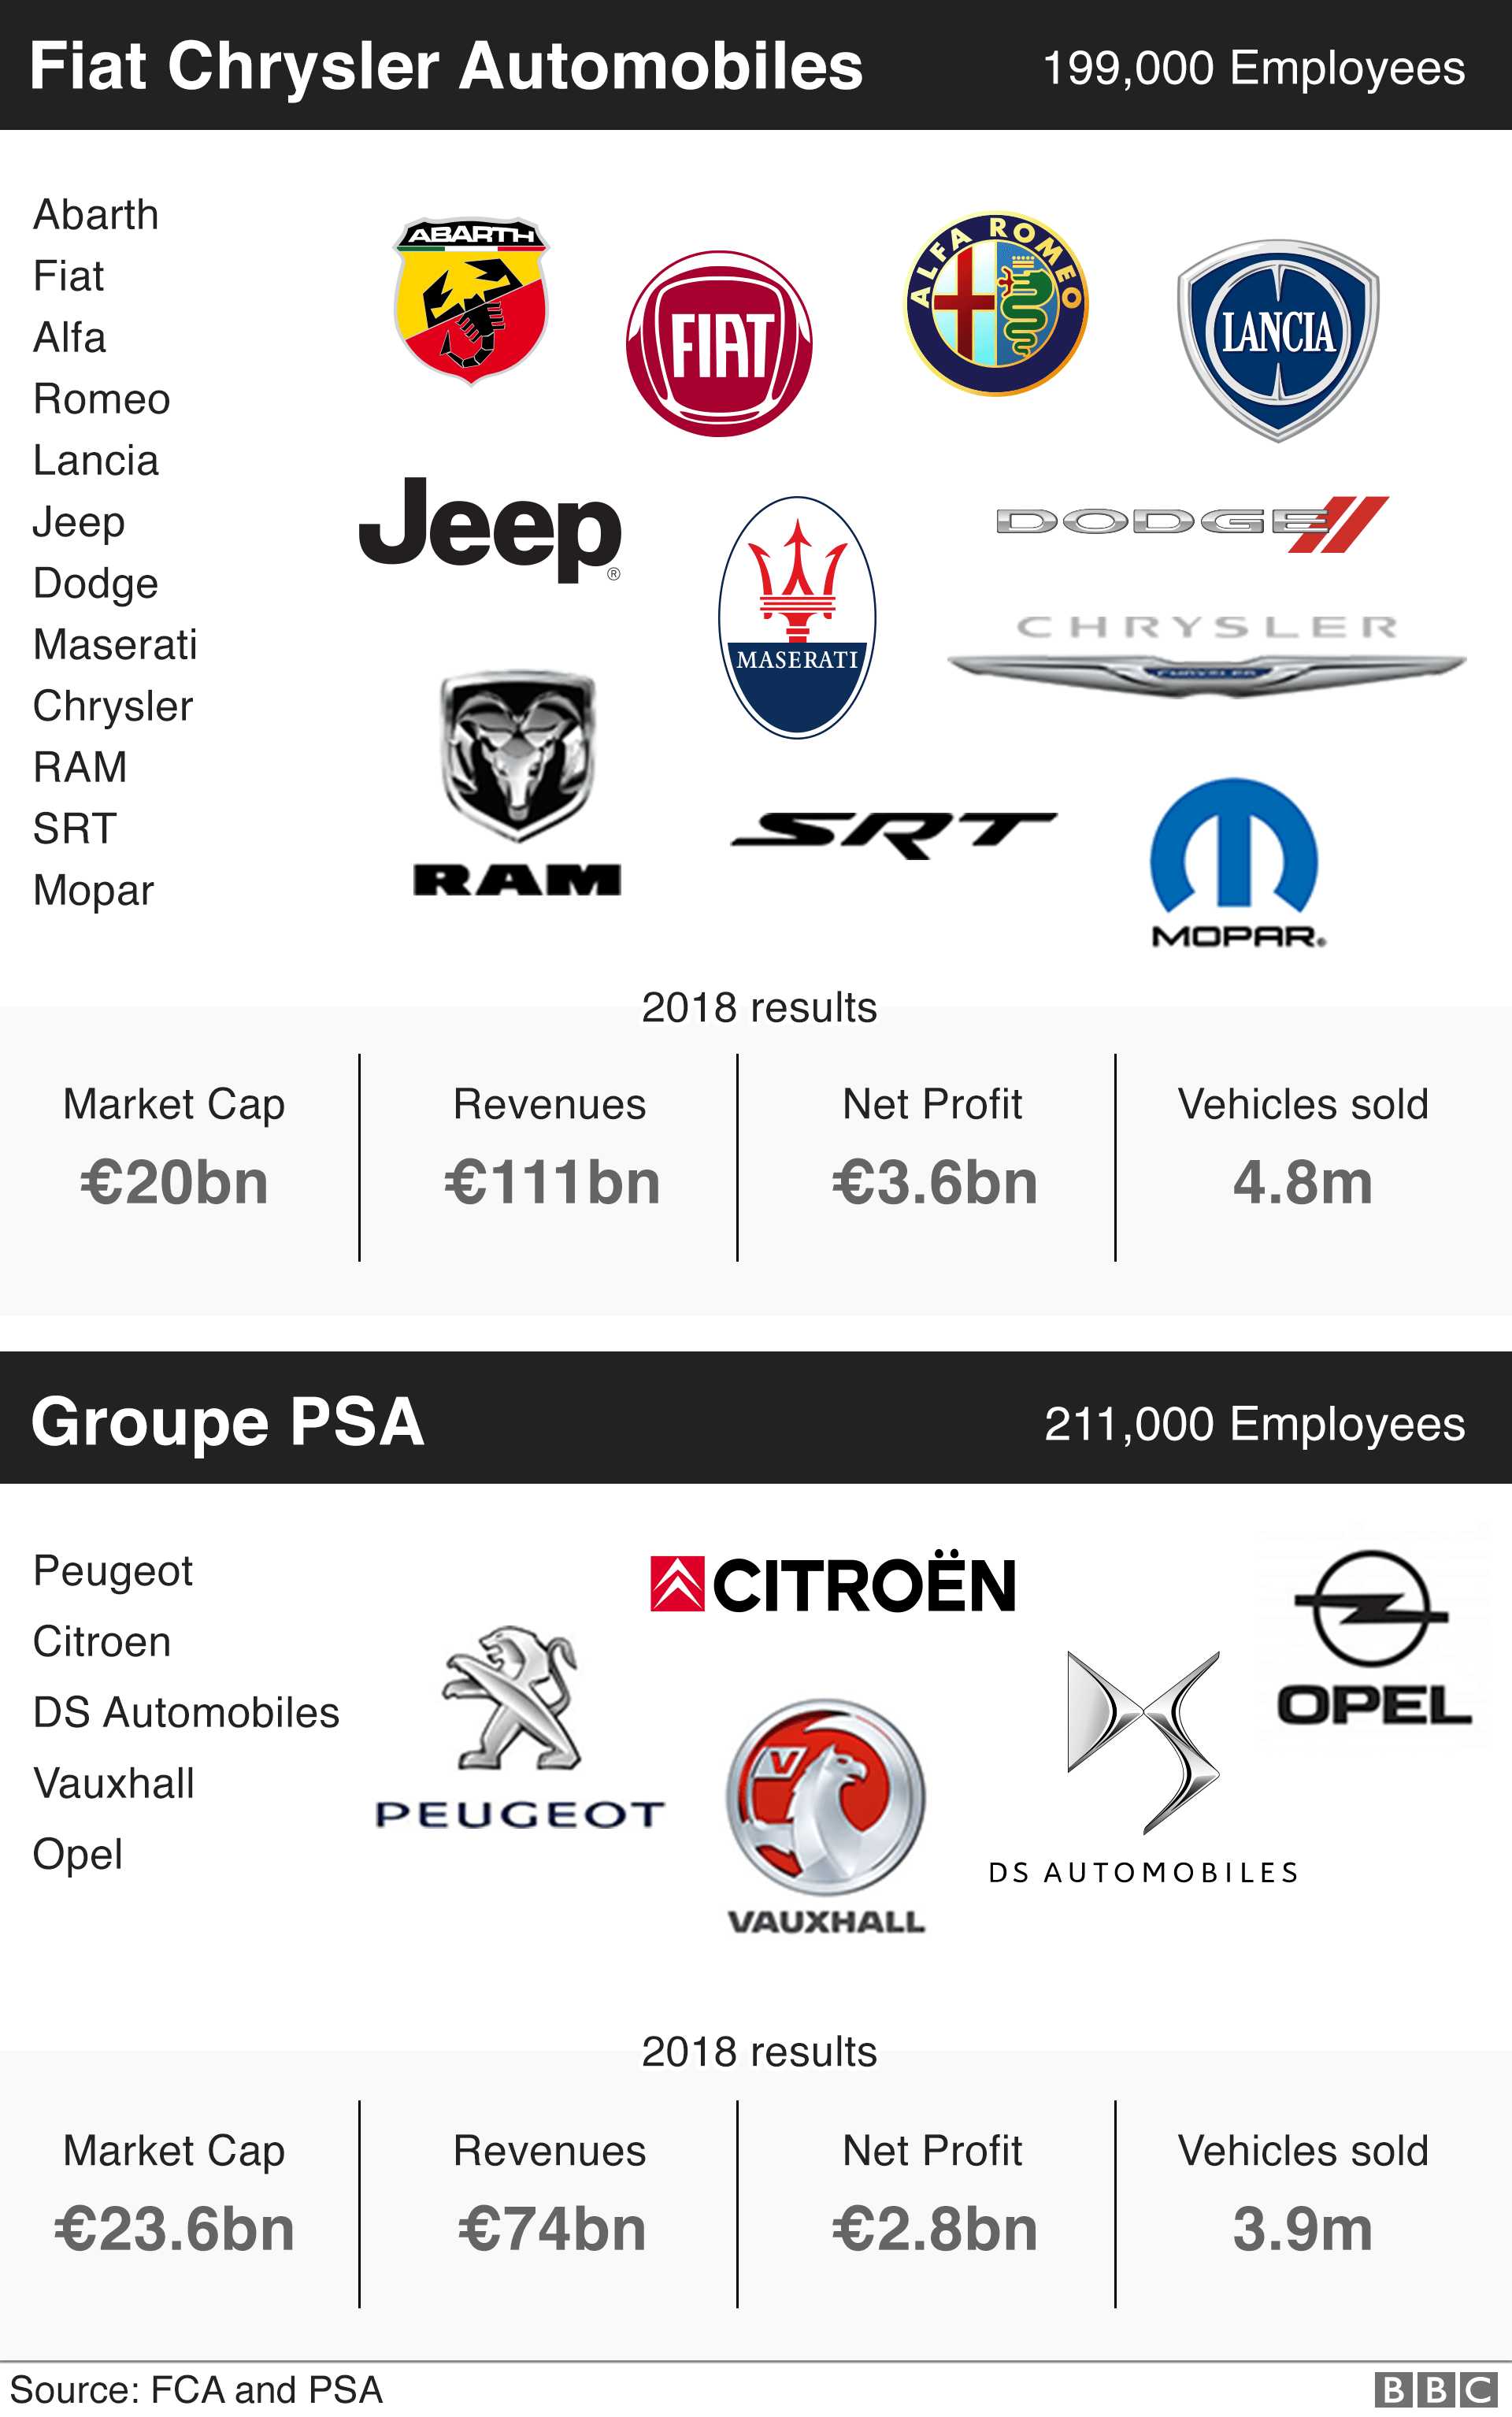 Graphic on Fiat Chrysler and PSA Group